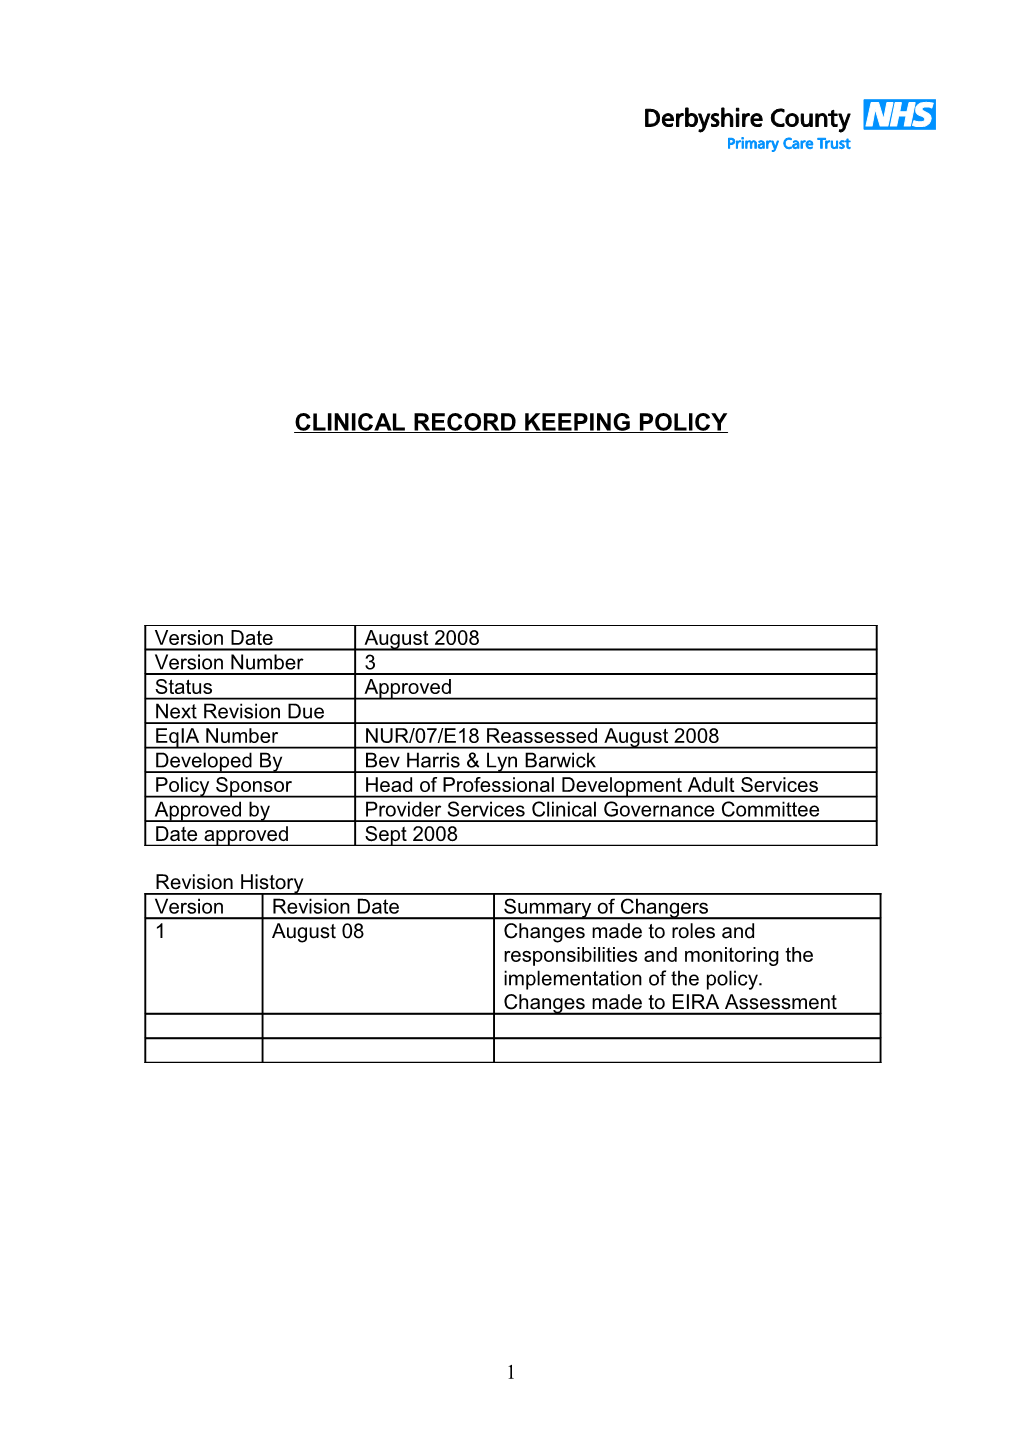 Clinical Record Keeping Policy